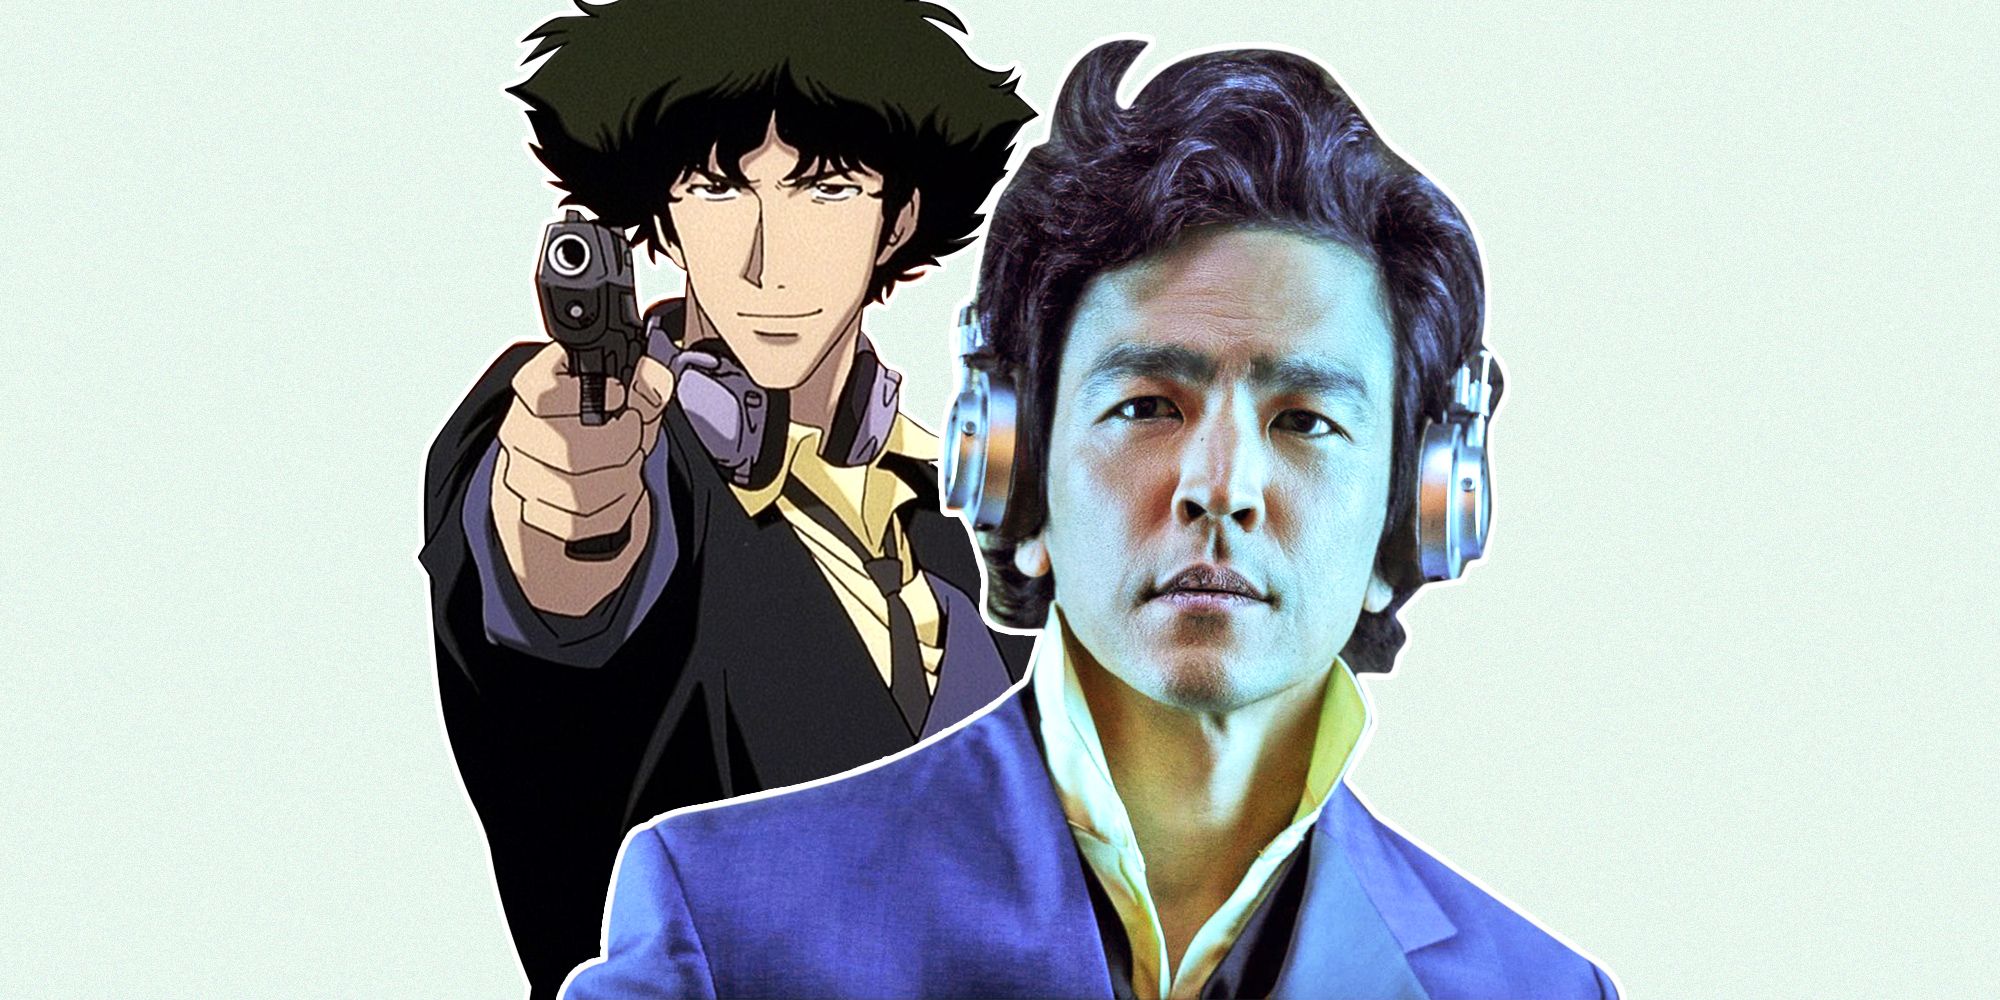 when was cowboy bebop series released in the states